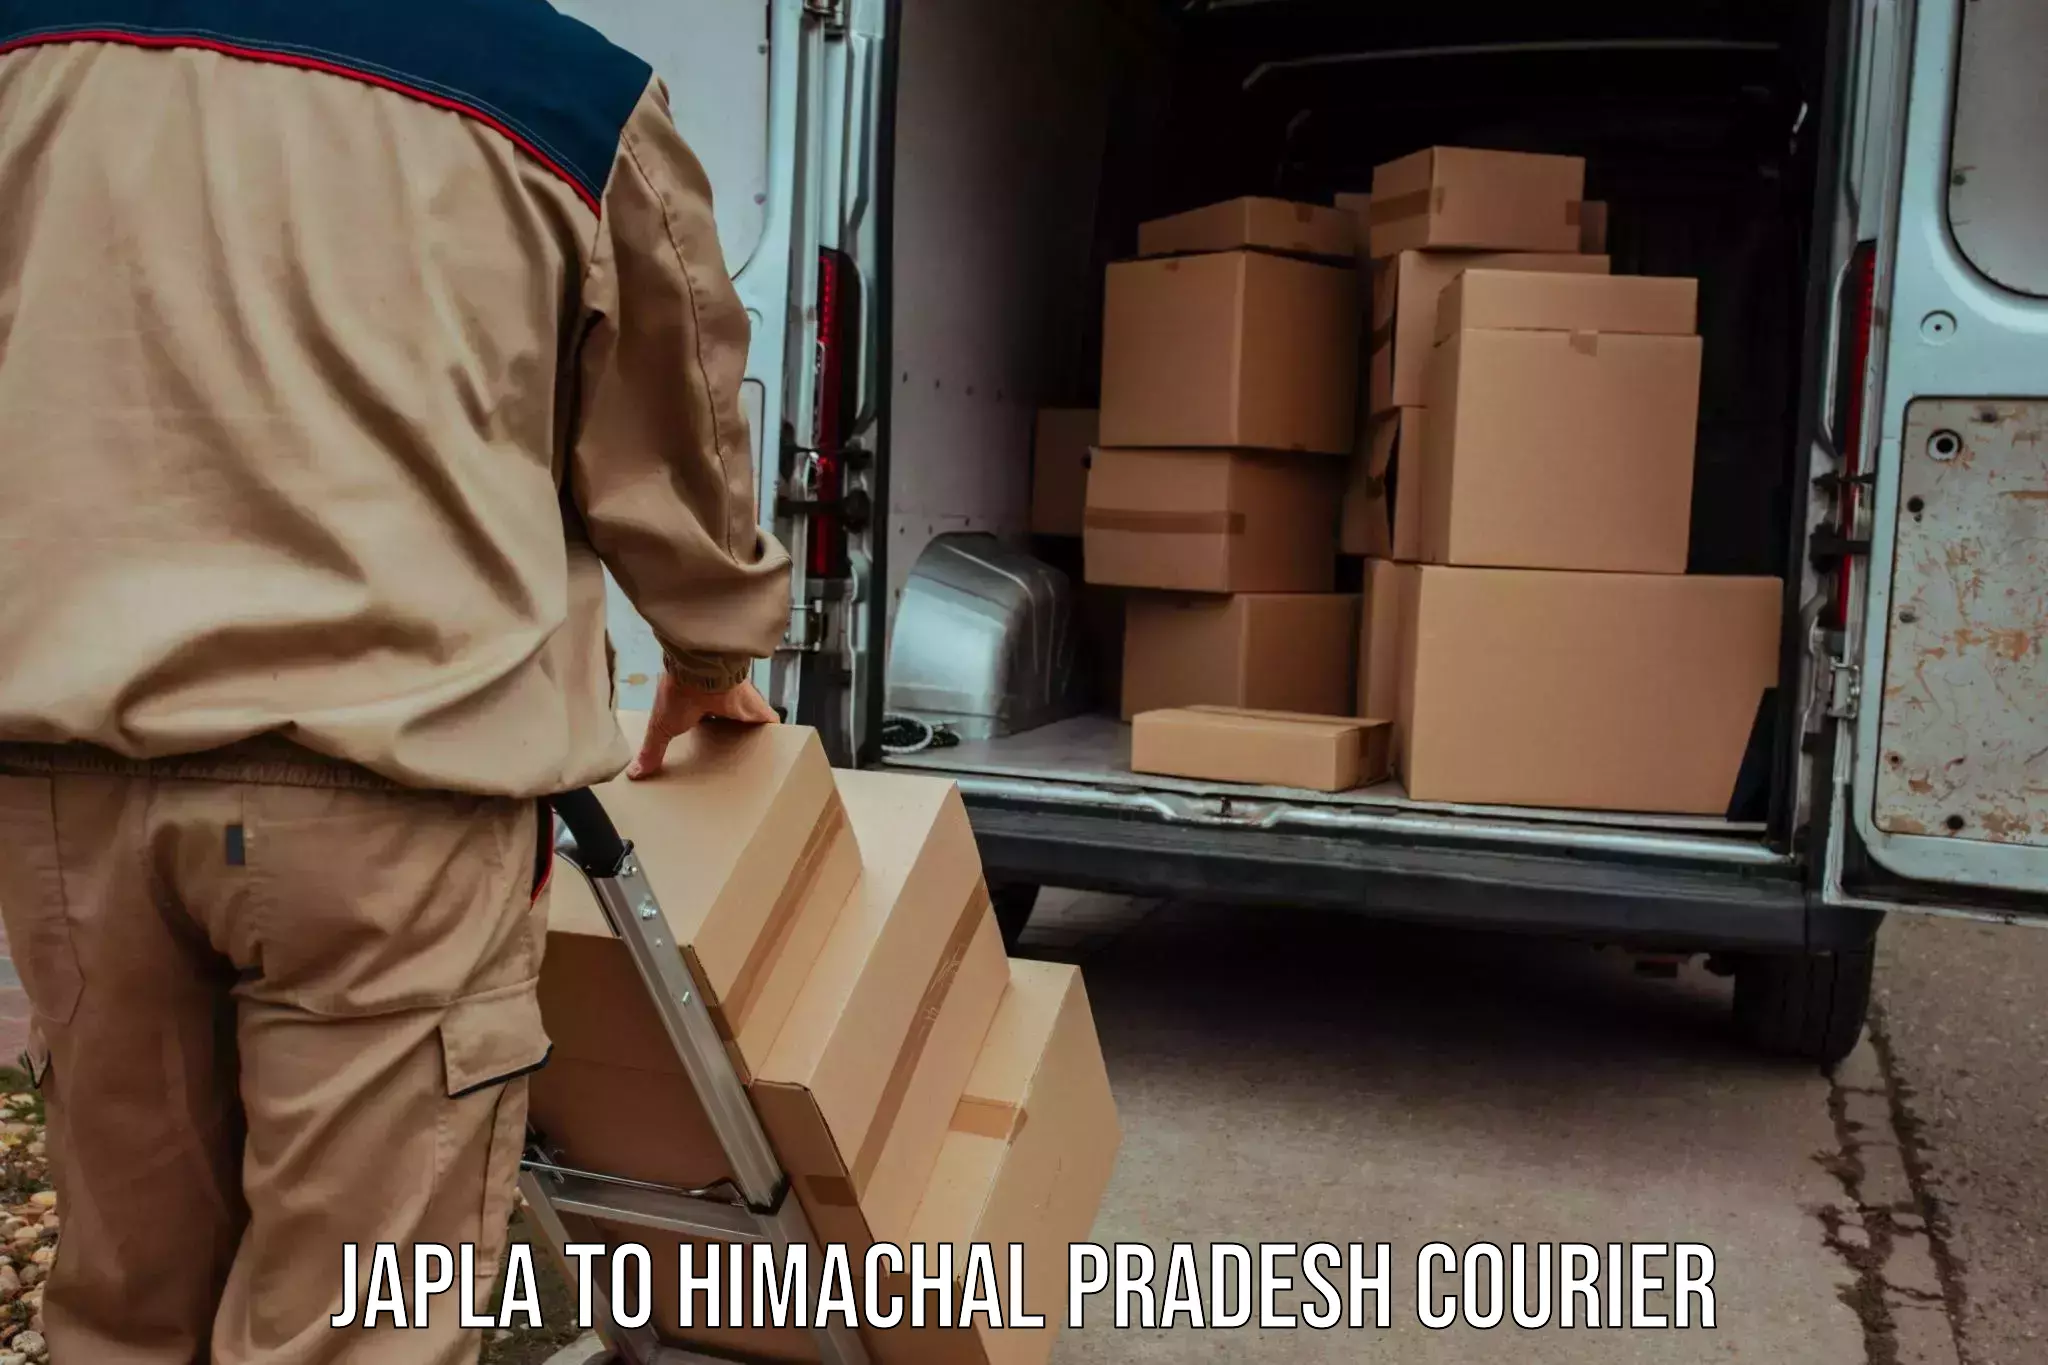 State-of-the-art courier technology Japla to Dharamshala